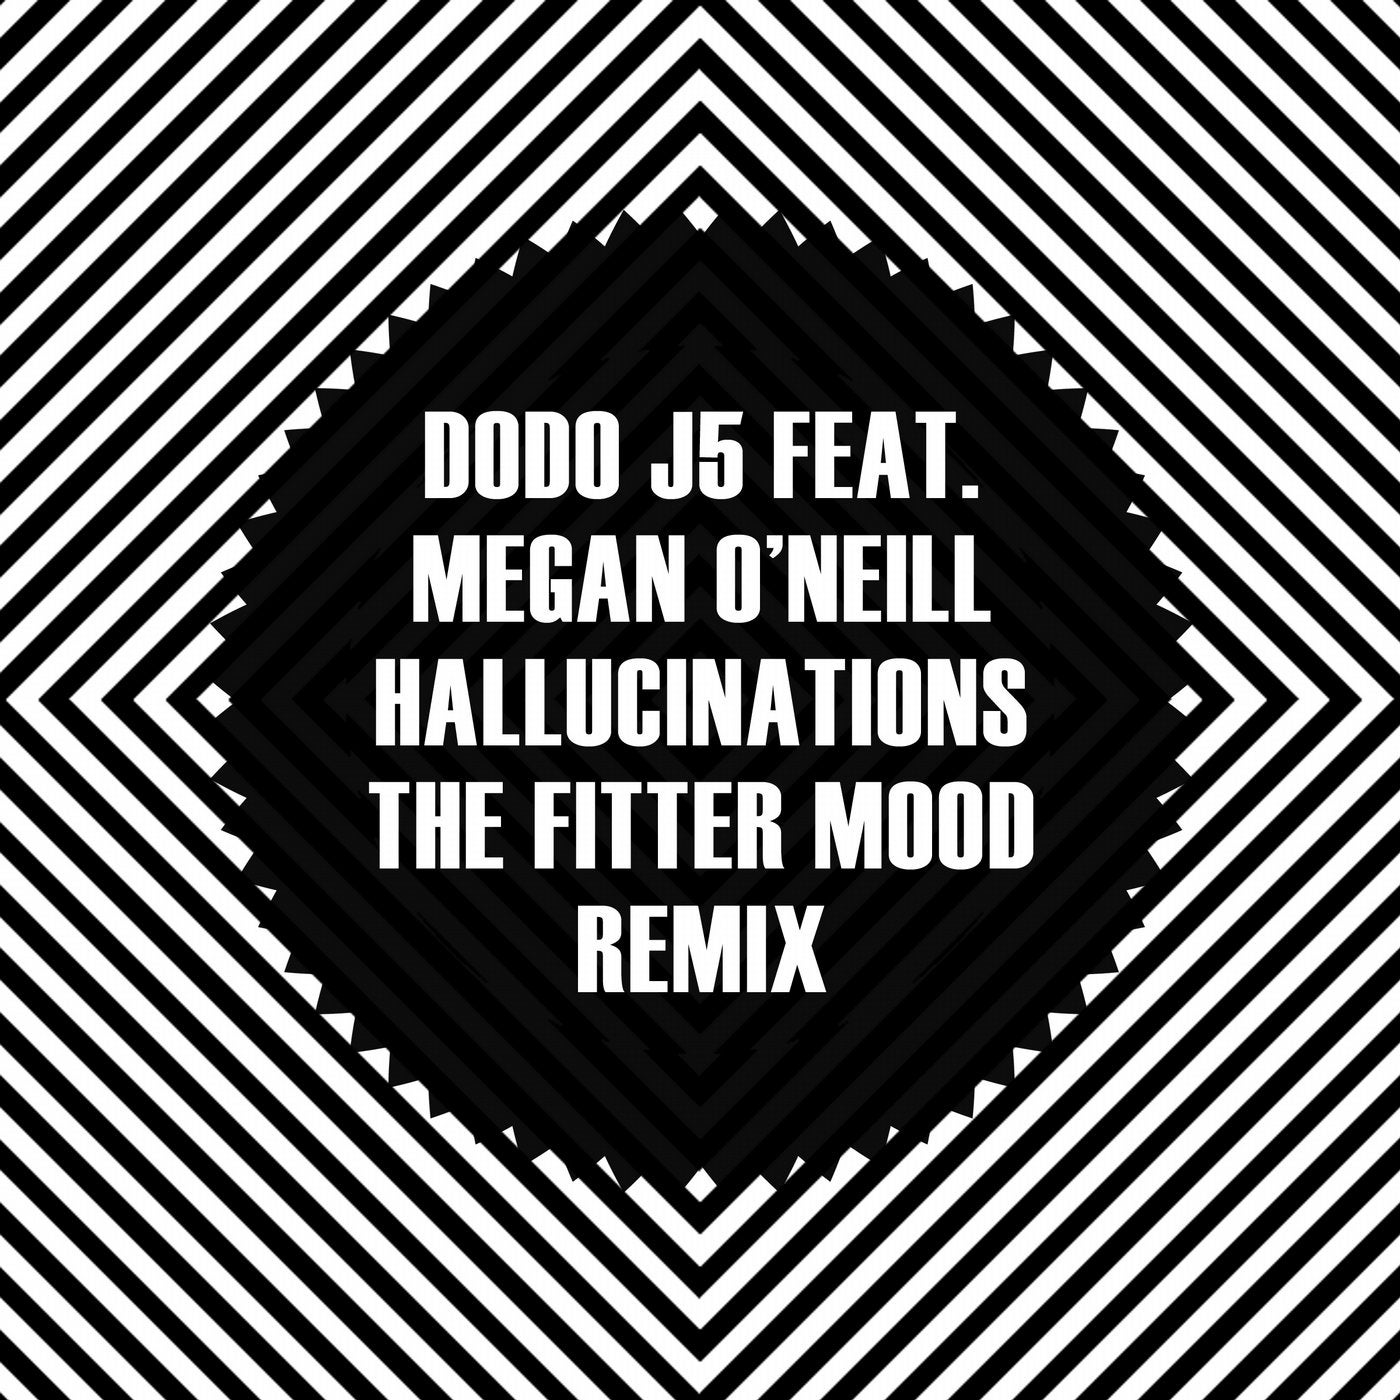 Hallucinations (The Fitter Mood Remix)